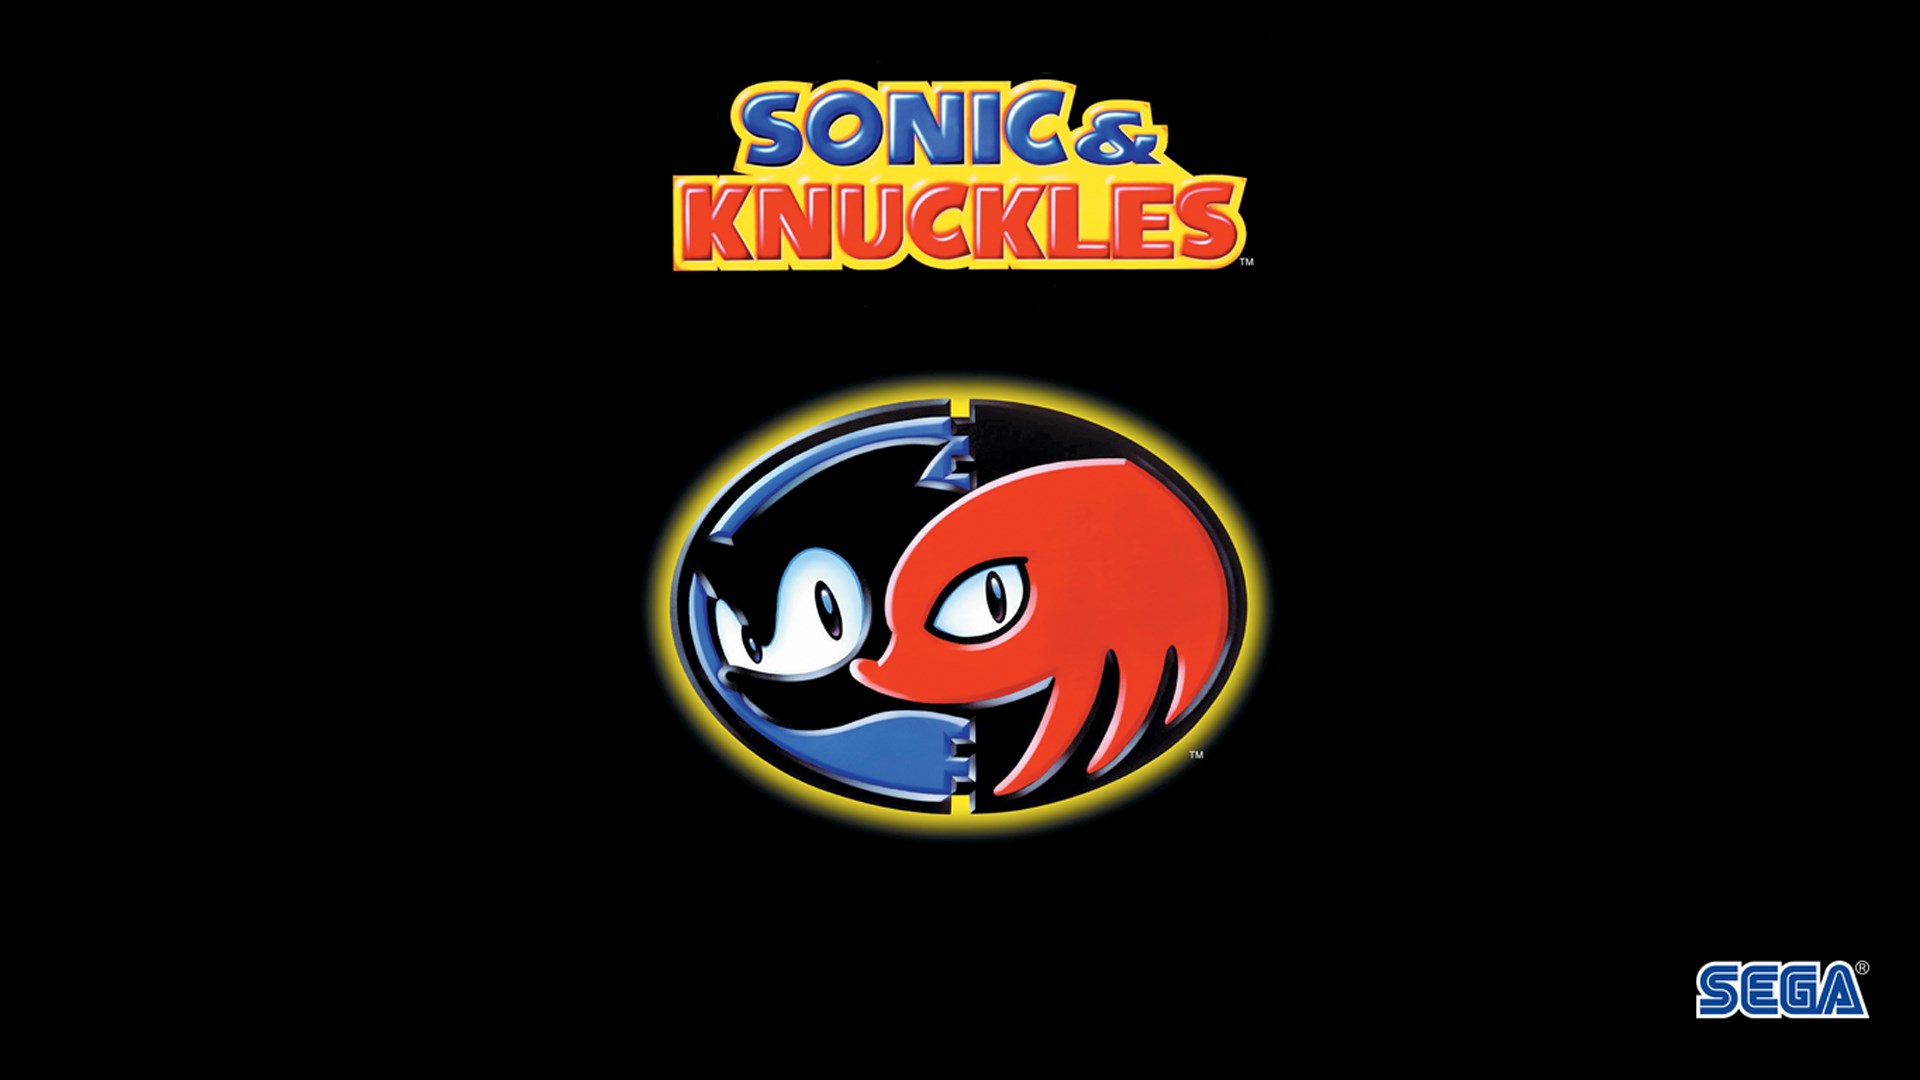 Sonic knuckles air. Sonic 3 and Knuckles картридж. Sonic Knuckles игра. Sonic 3 & Knuckles Sega. Sonic 3 and Knuckles обложка.